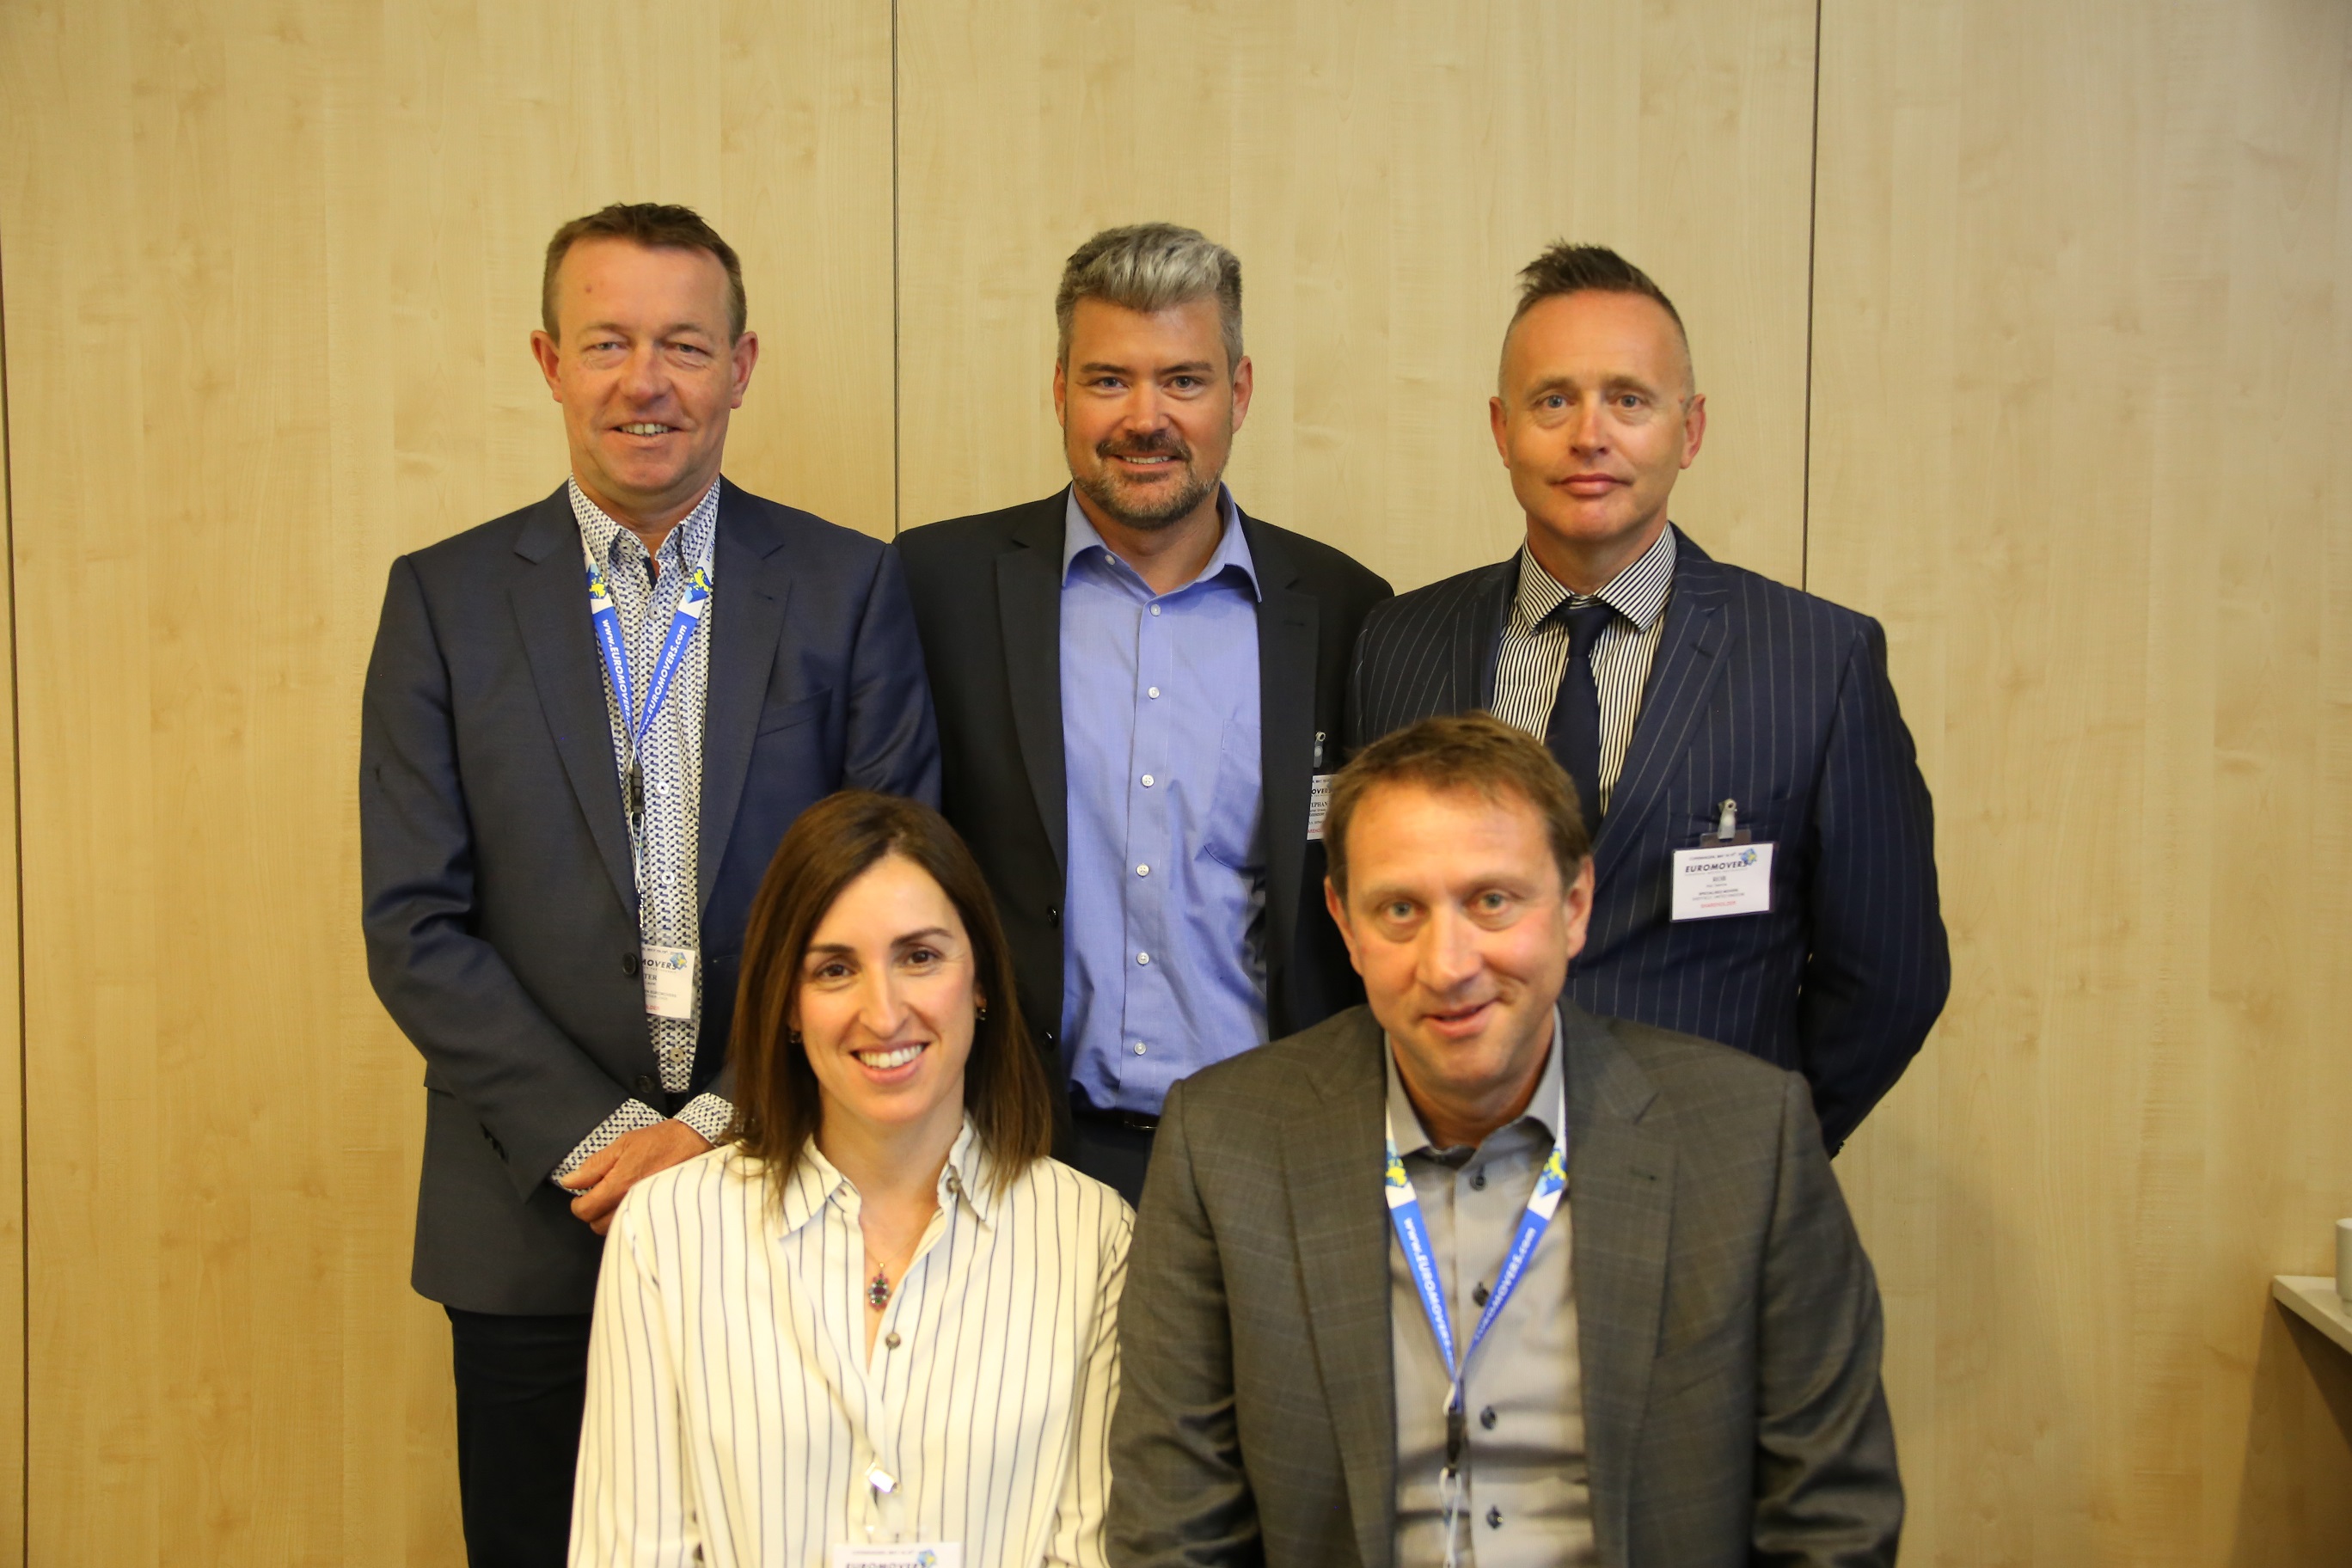 The new EUROMOVERS Board of Directors